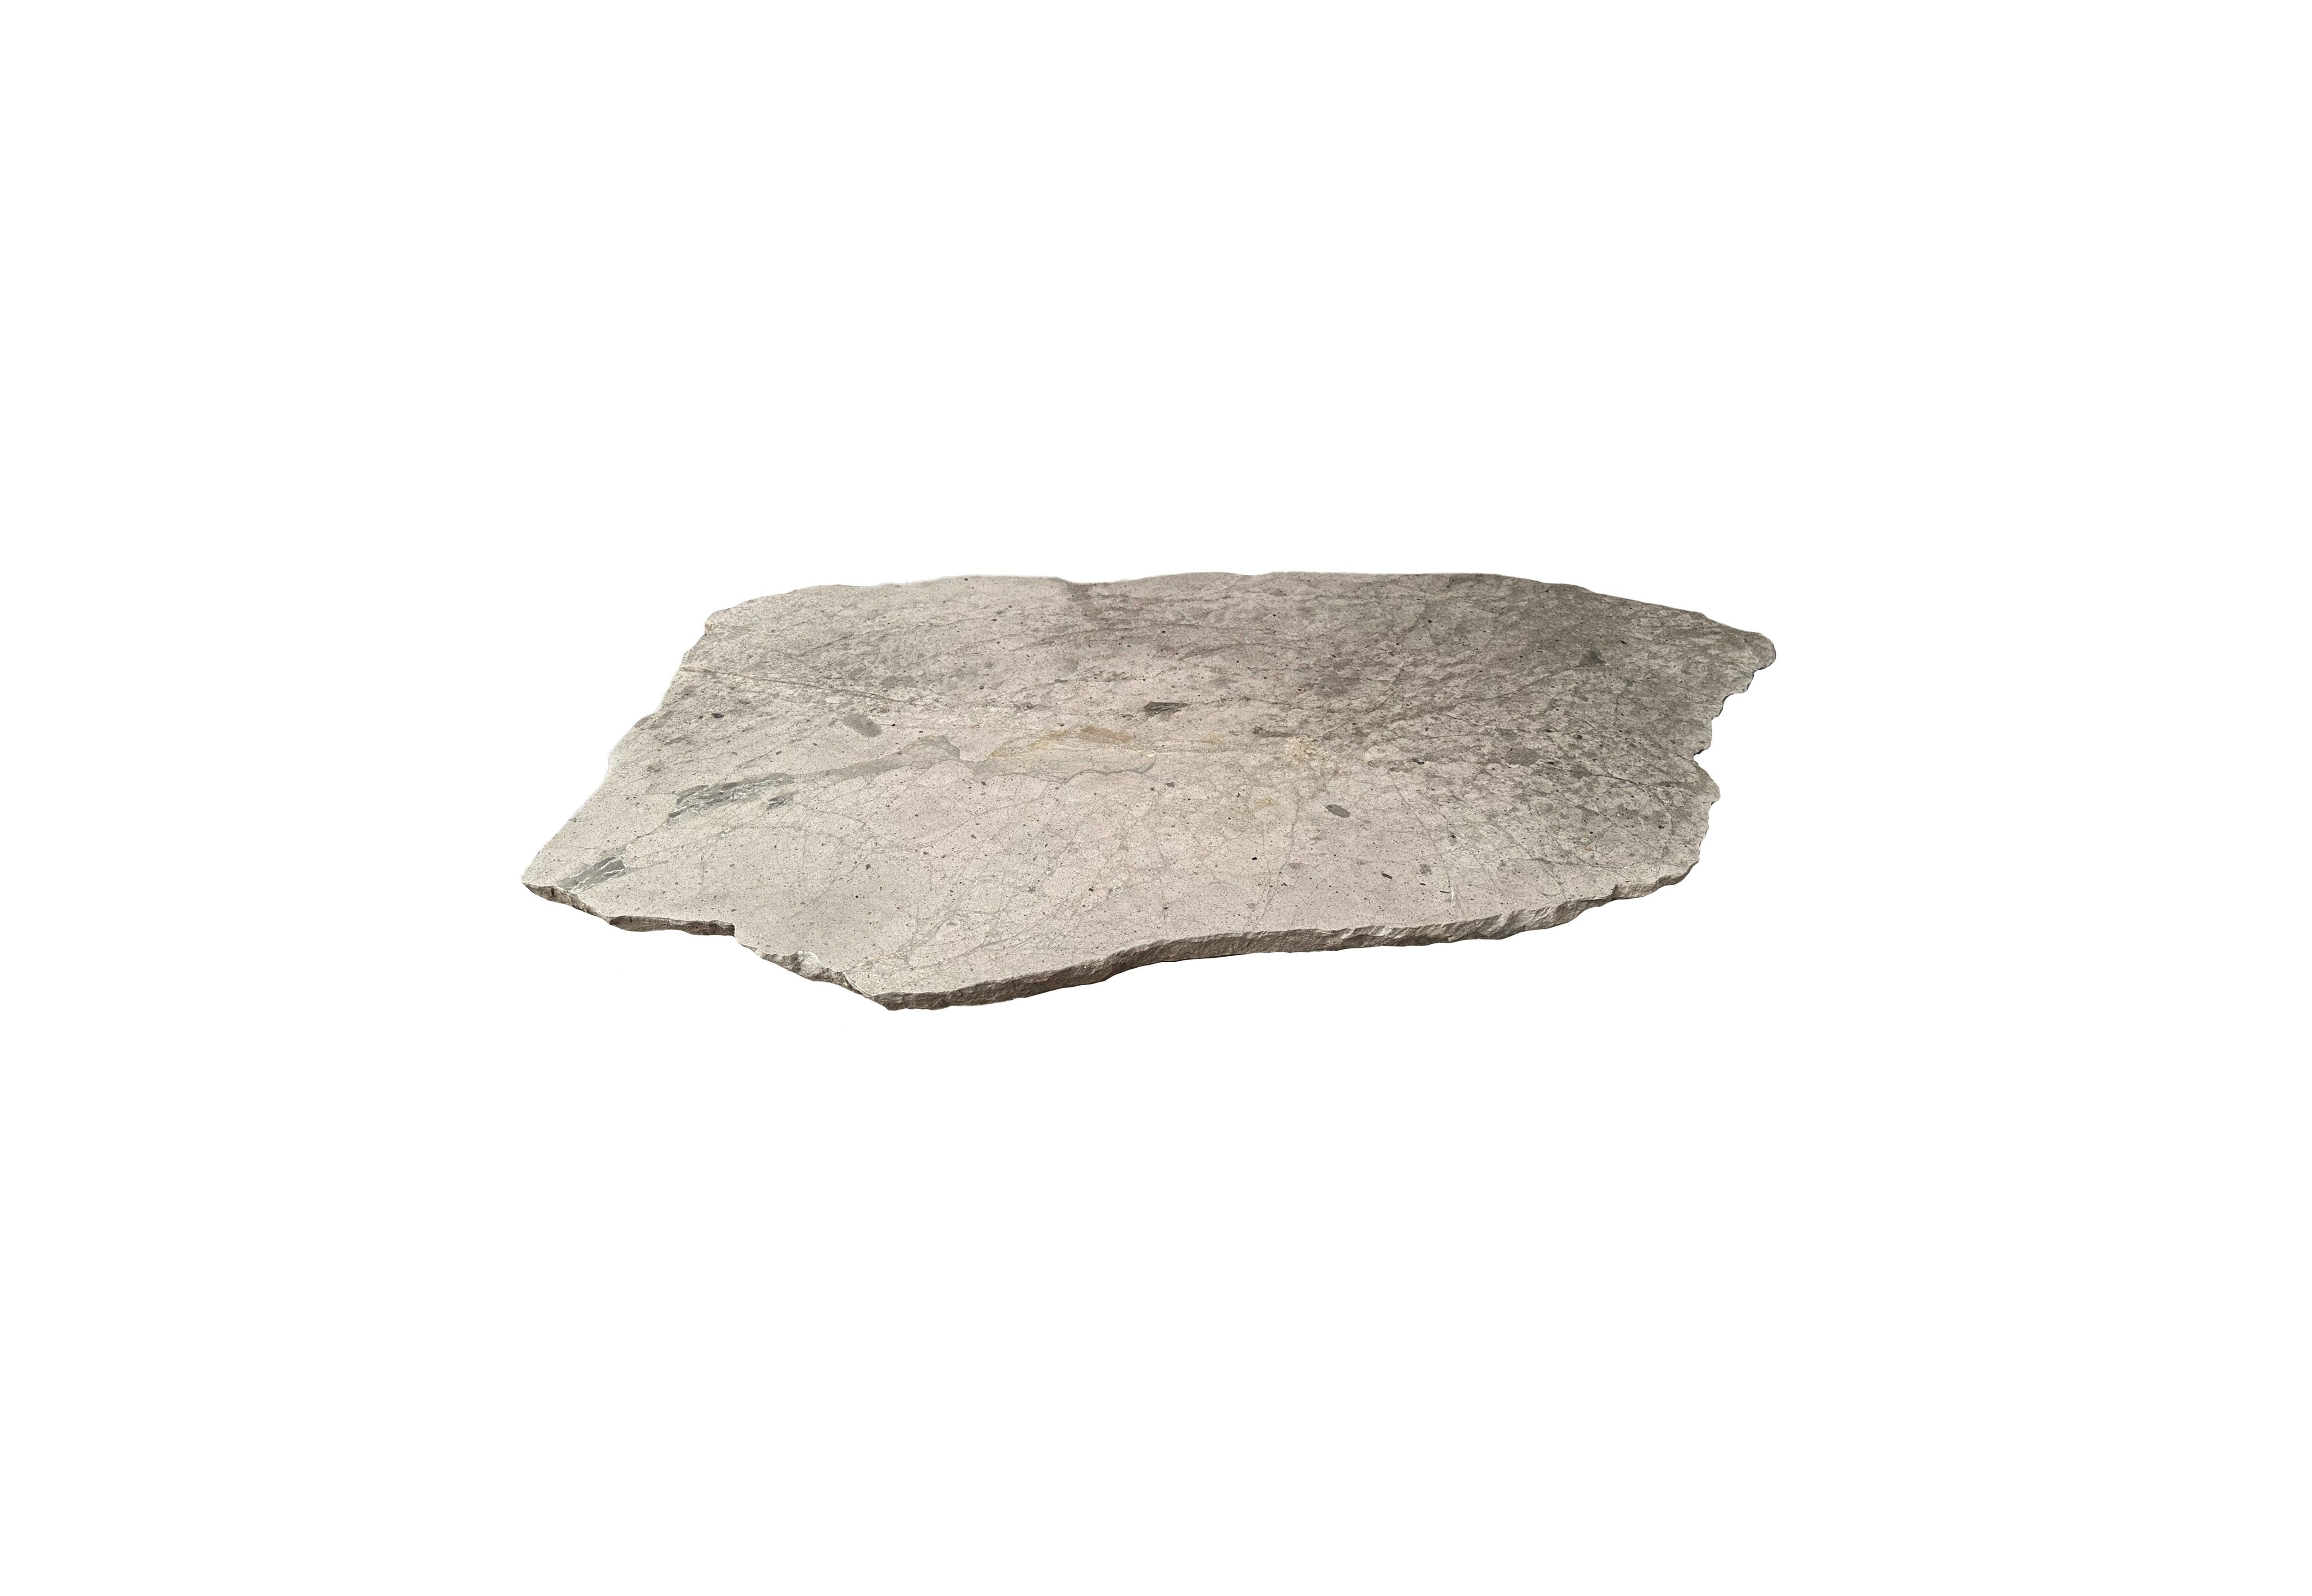 Solid Sculptural River Stone Table from Java, Indonesia, Modern Organic In Good Condition In Jimbaran, Bali